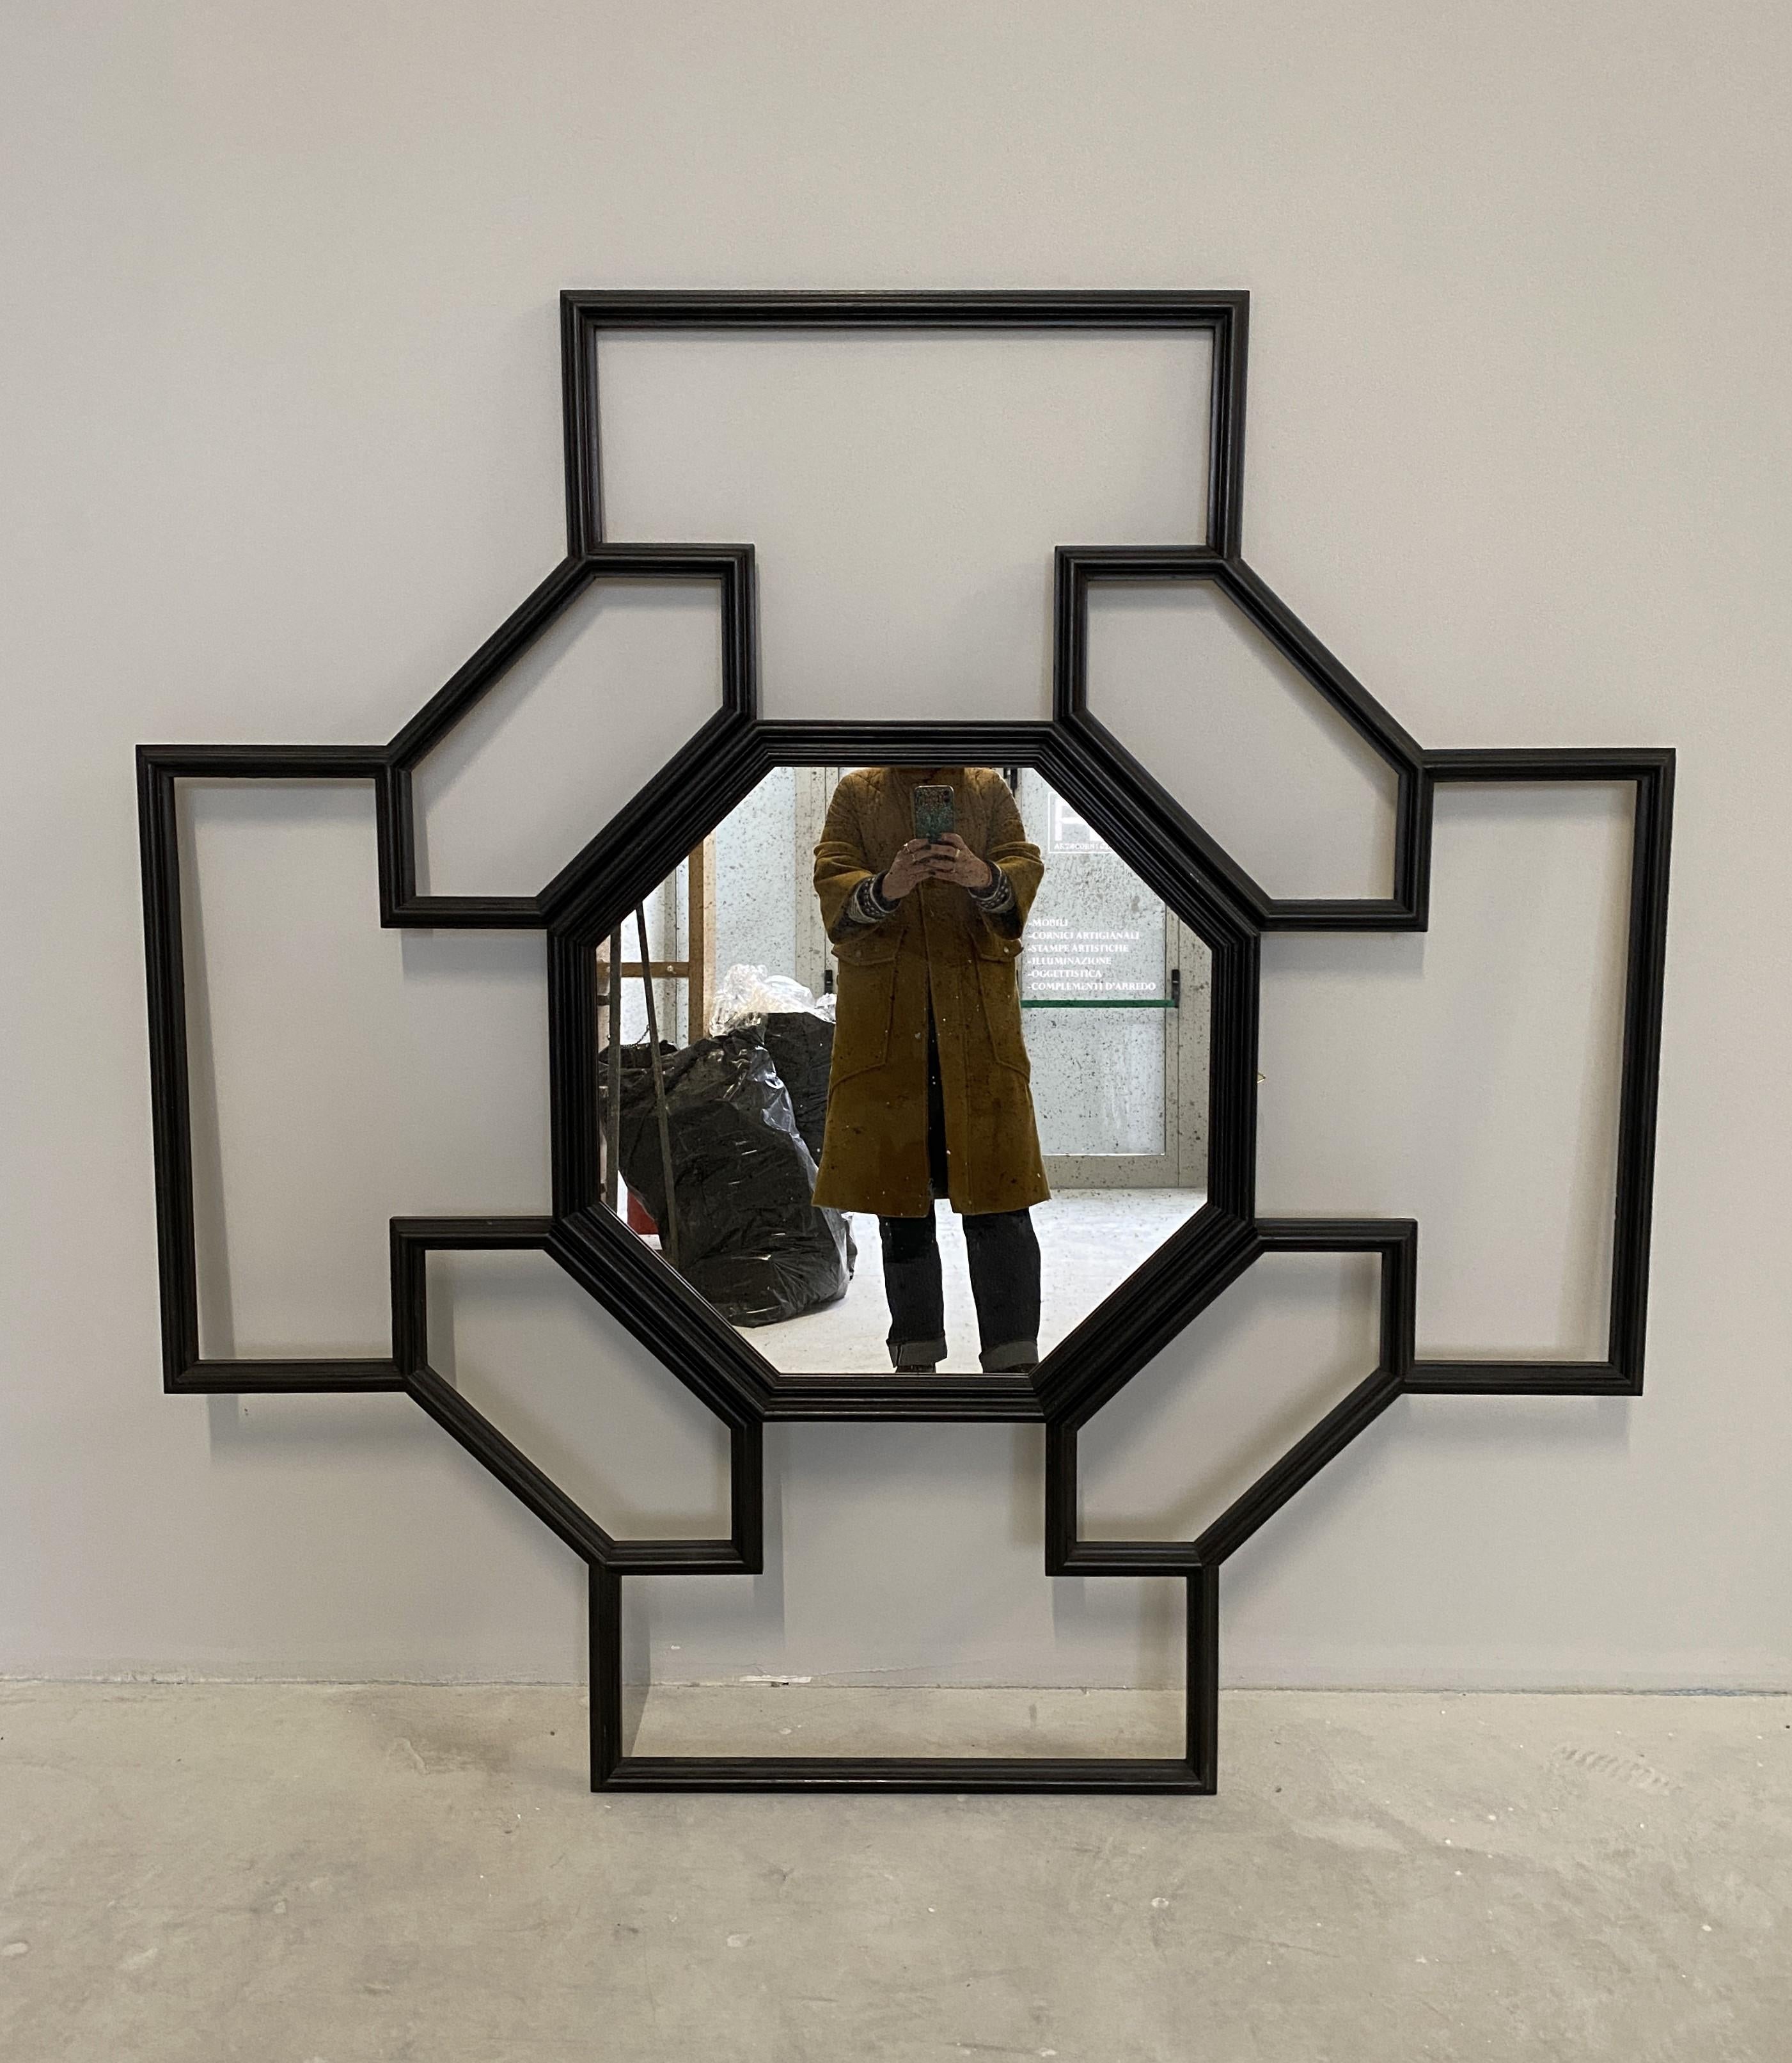 A hand crafted tulipwood structure make this mirror exclusive and elegant. The frame creates geometric lozenge shapes, which inconceive an octagonal-shaped mirror in the center. The frames are painted with a black patina. 
Glass measurements 70 x70x